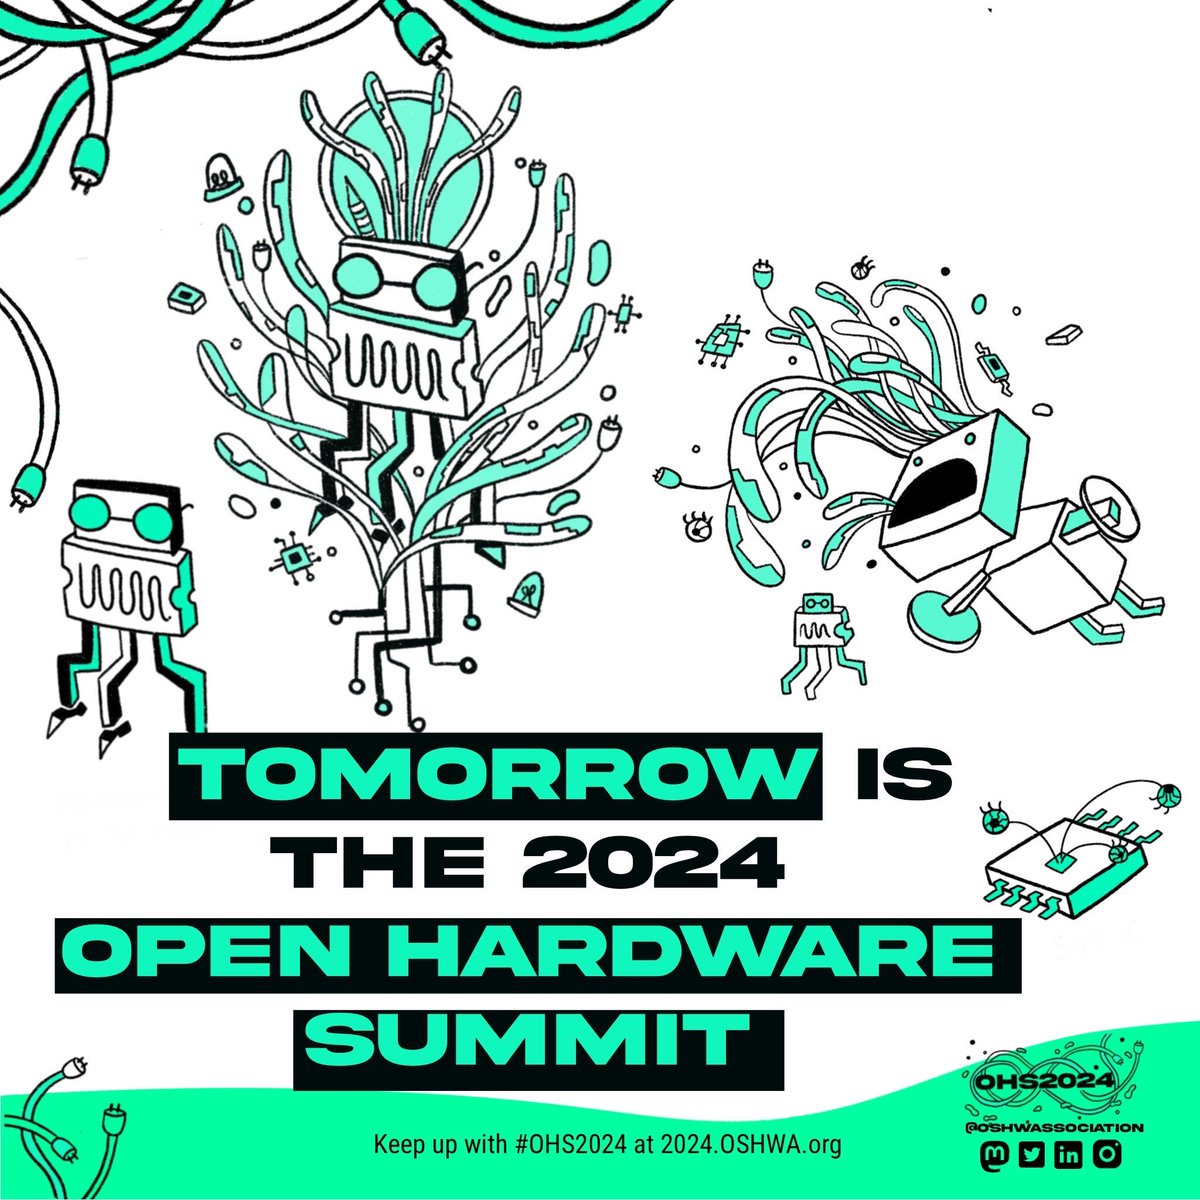 🙀🙀🙀 the Summit is TOMORROW!!!! But it you’re in town early don’t forget that there’s a Reuse Makeathon from 3-6 at Concordia Reuse Center and the Happy Hardware Hour at Radio Snack! All details on 2024.oshwa.org/schedule